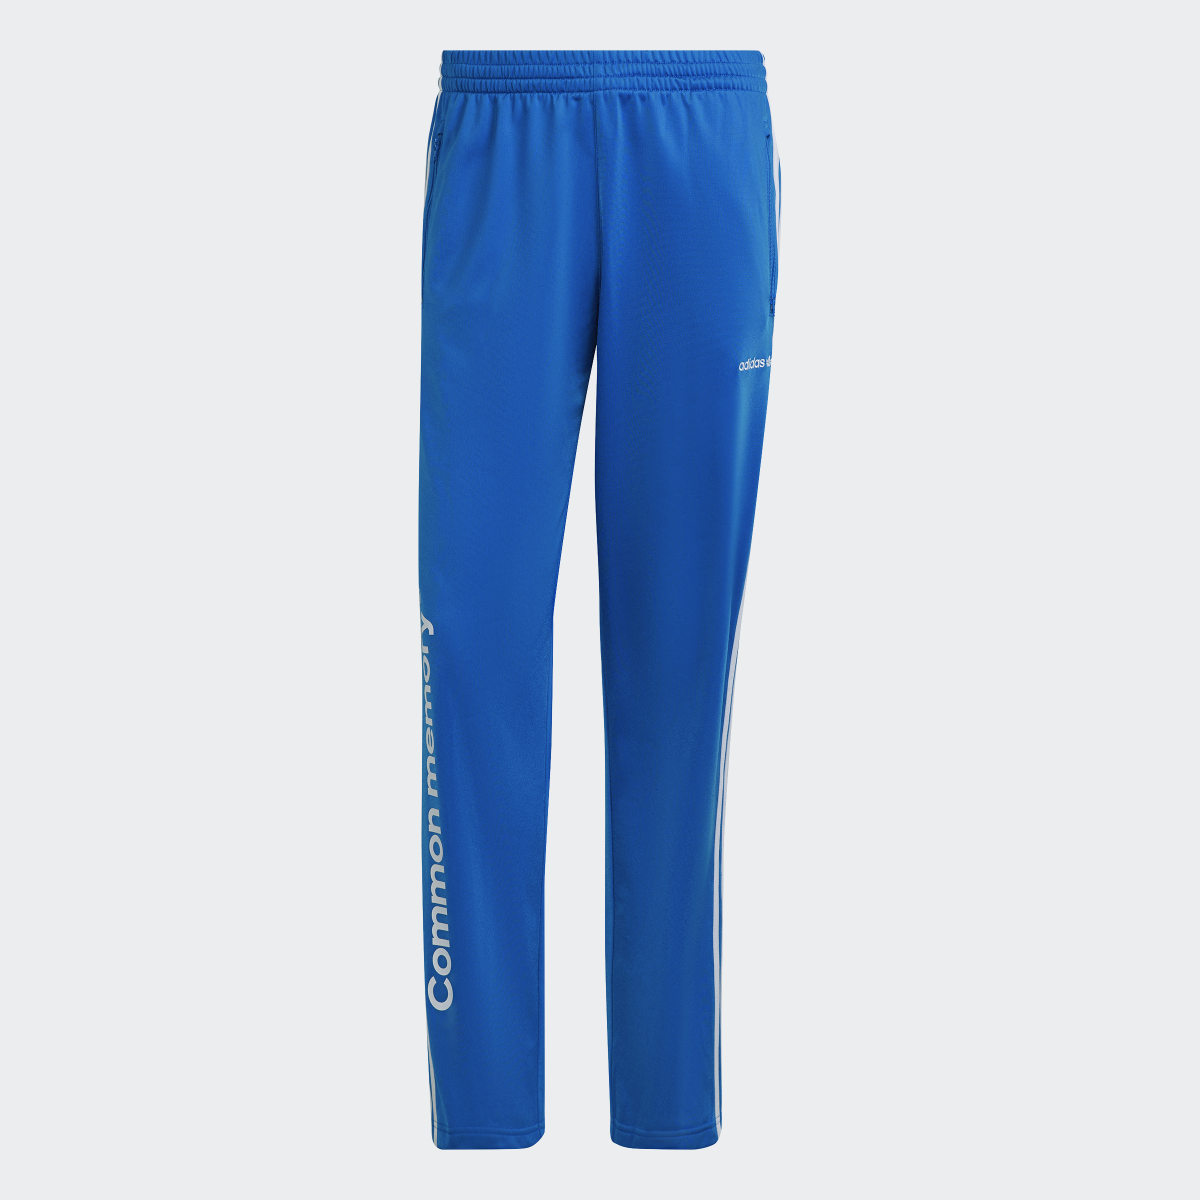 Adidas Graphic Common Memory Tracksuit Bottoms. 5